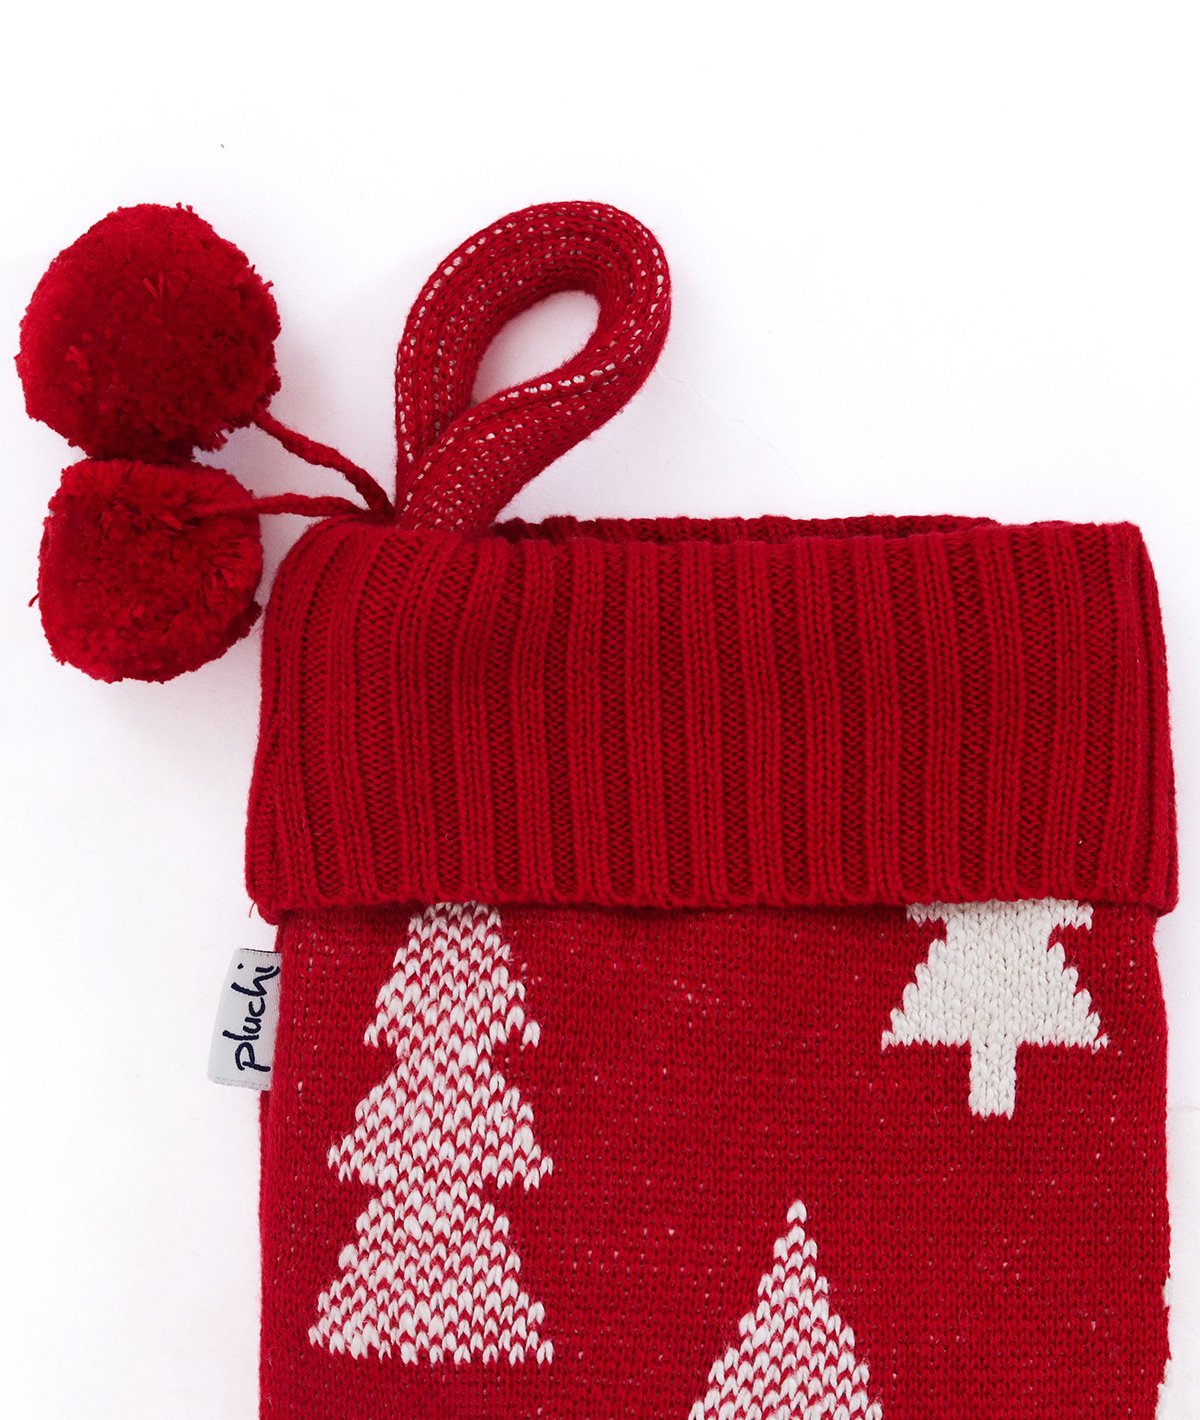 X-mas Tree - Red & Natural Color Cotton Knitted Christmas Decorative Stocking